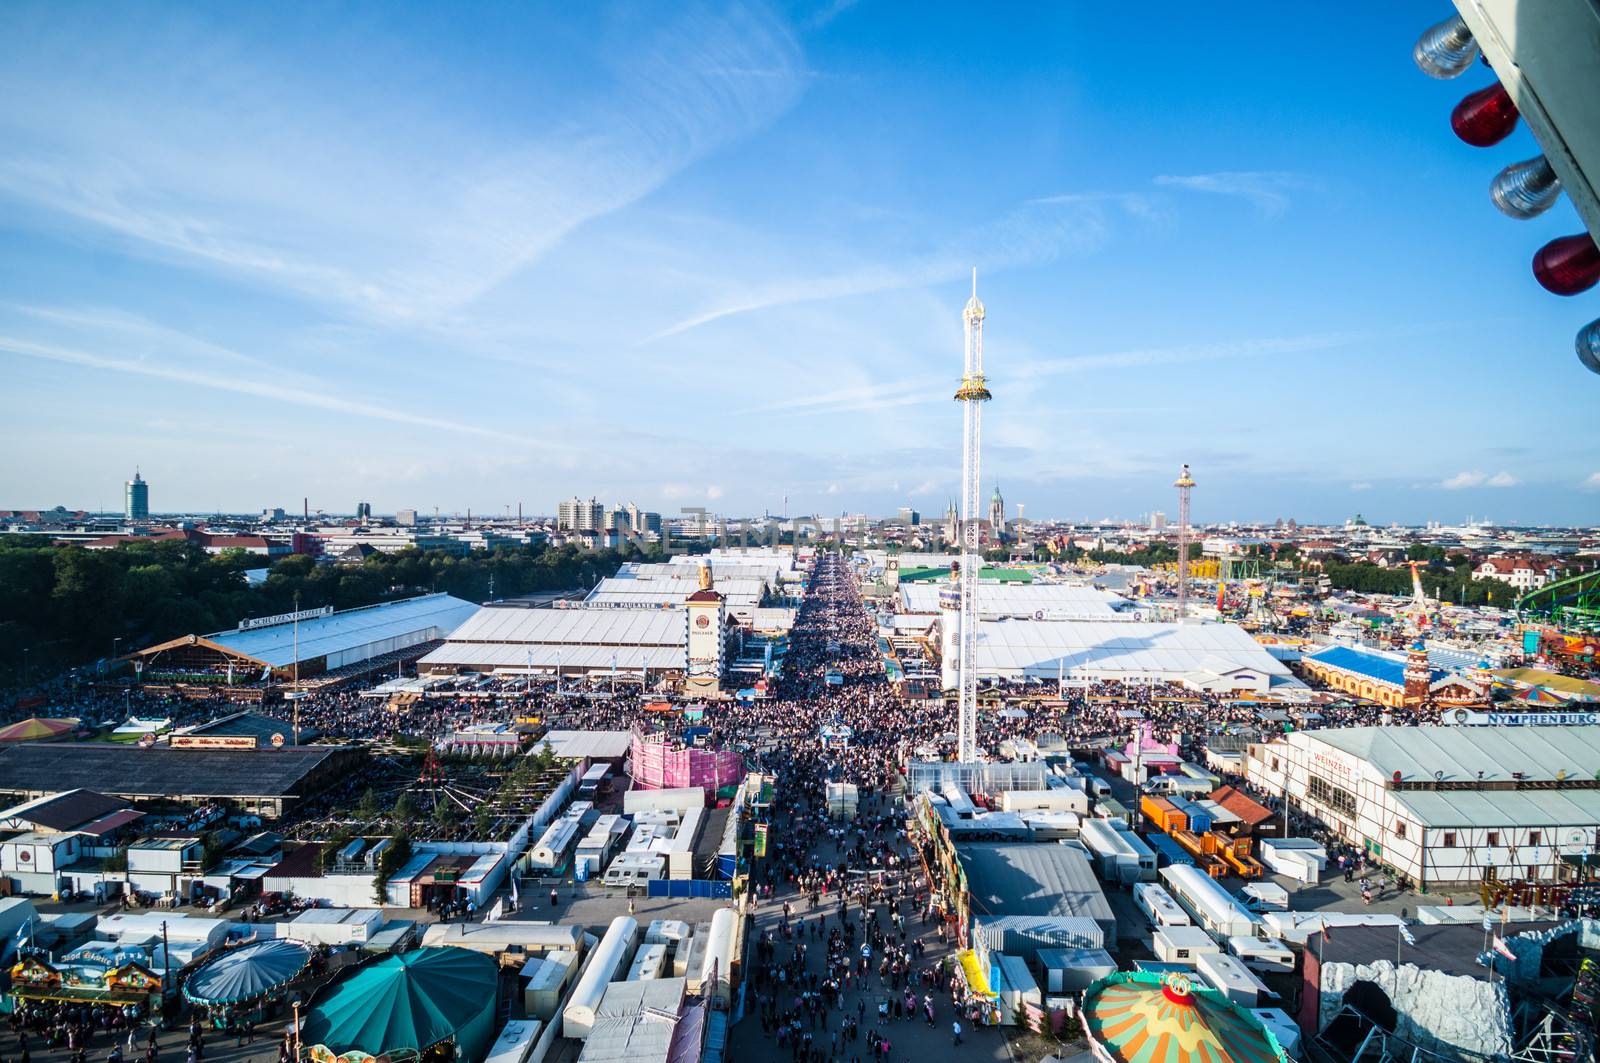 view of the Oktoberfest from the ferris wheel